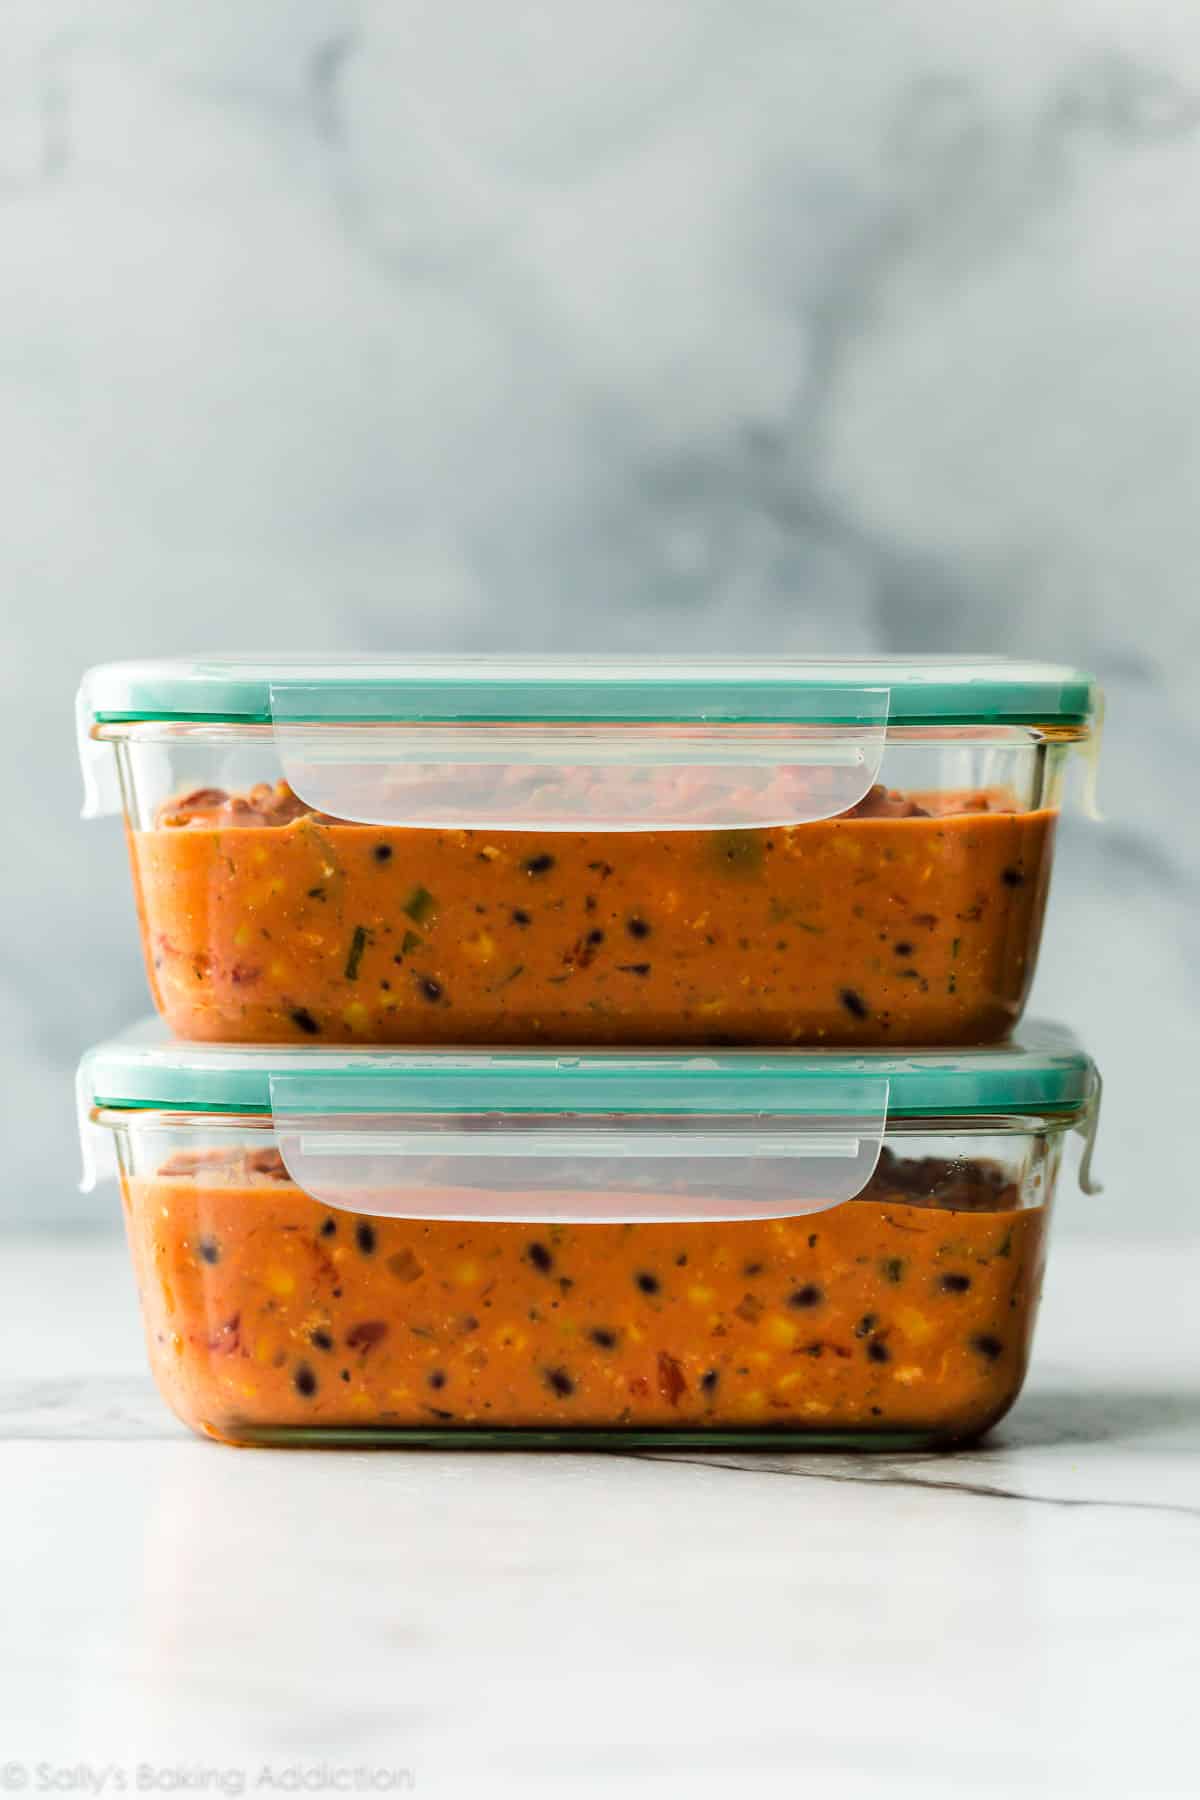 10 Delicious Make Ahead Freezer Meal Recipes to Double and Share